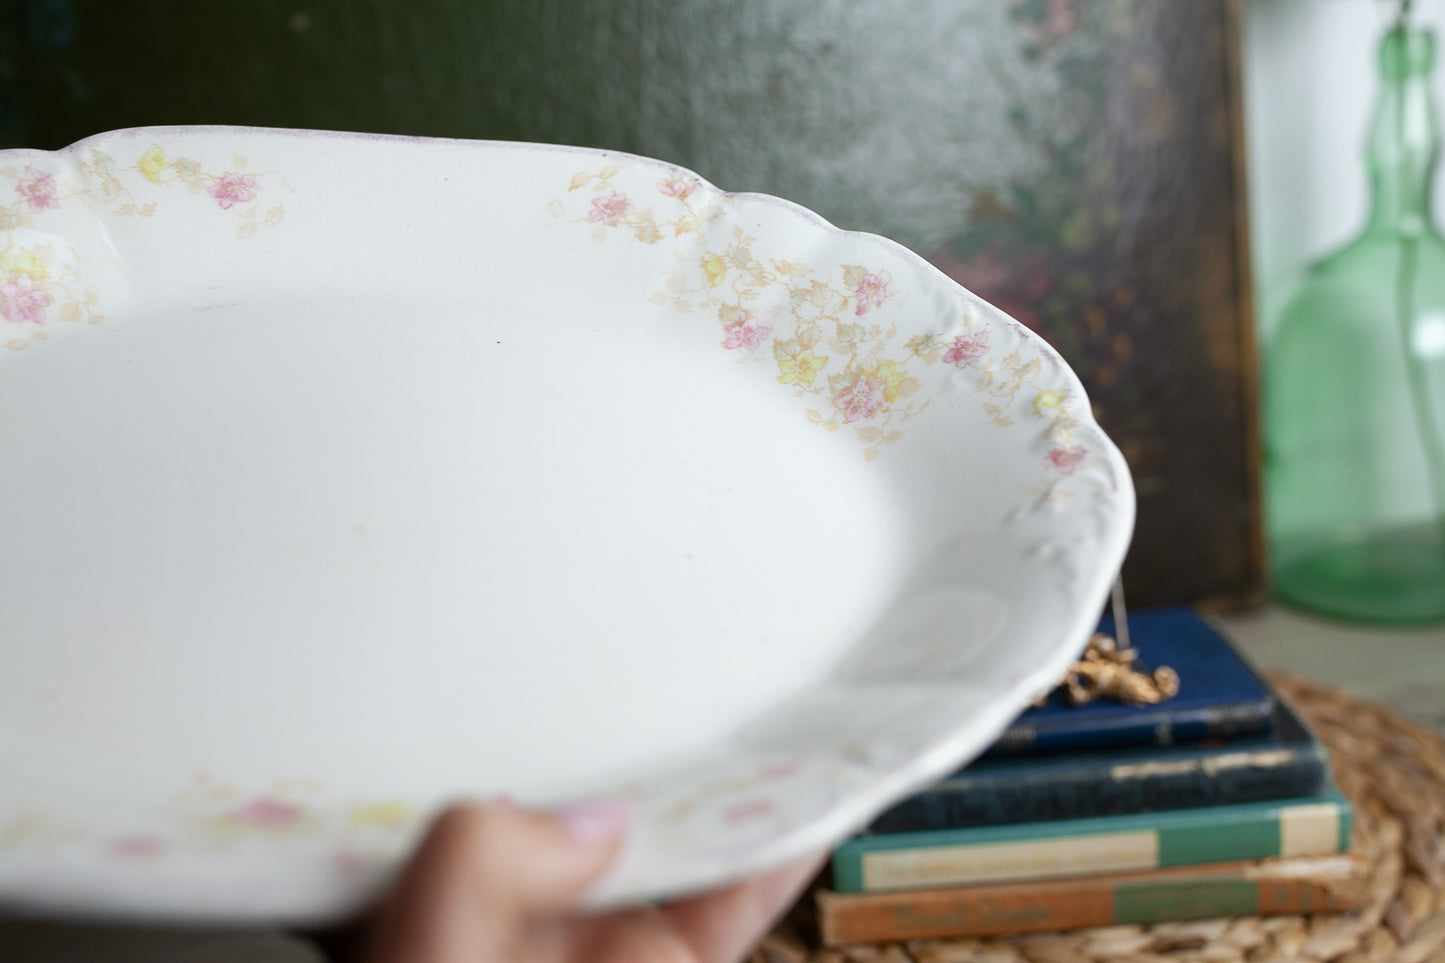 Antique Platter- Antique China - Floral Platter - Pink and Yellow florals -Bridgwood &Son England